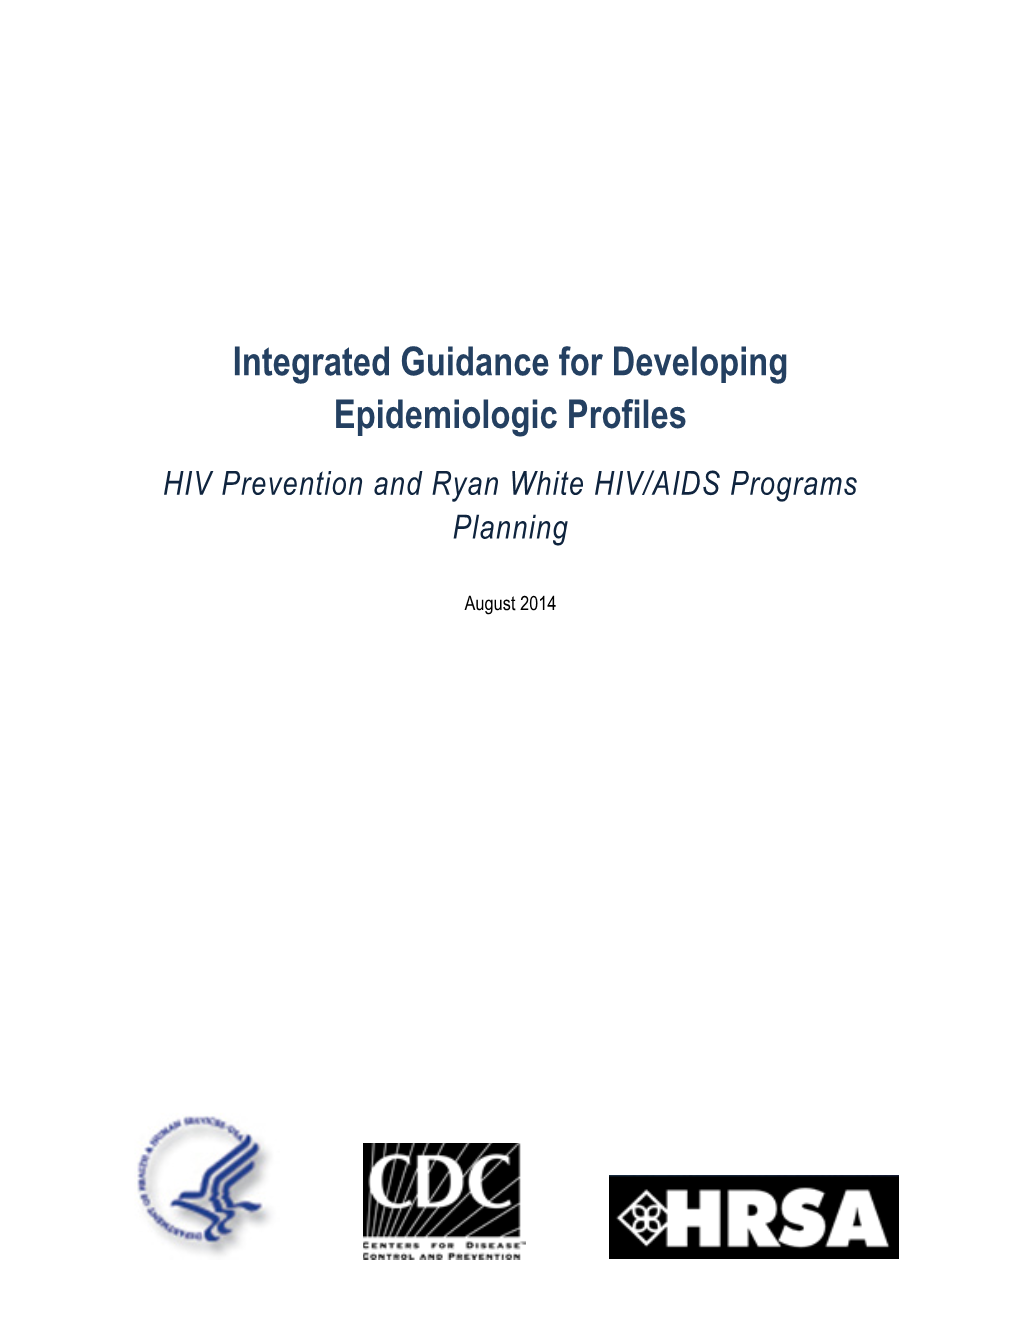 Integrated Guidance for Developing Epidemiologic Profiles – HIV Prevention and Ryan White HIV/AIDS Programs Planning, 2014